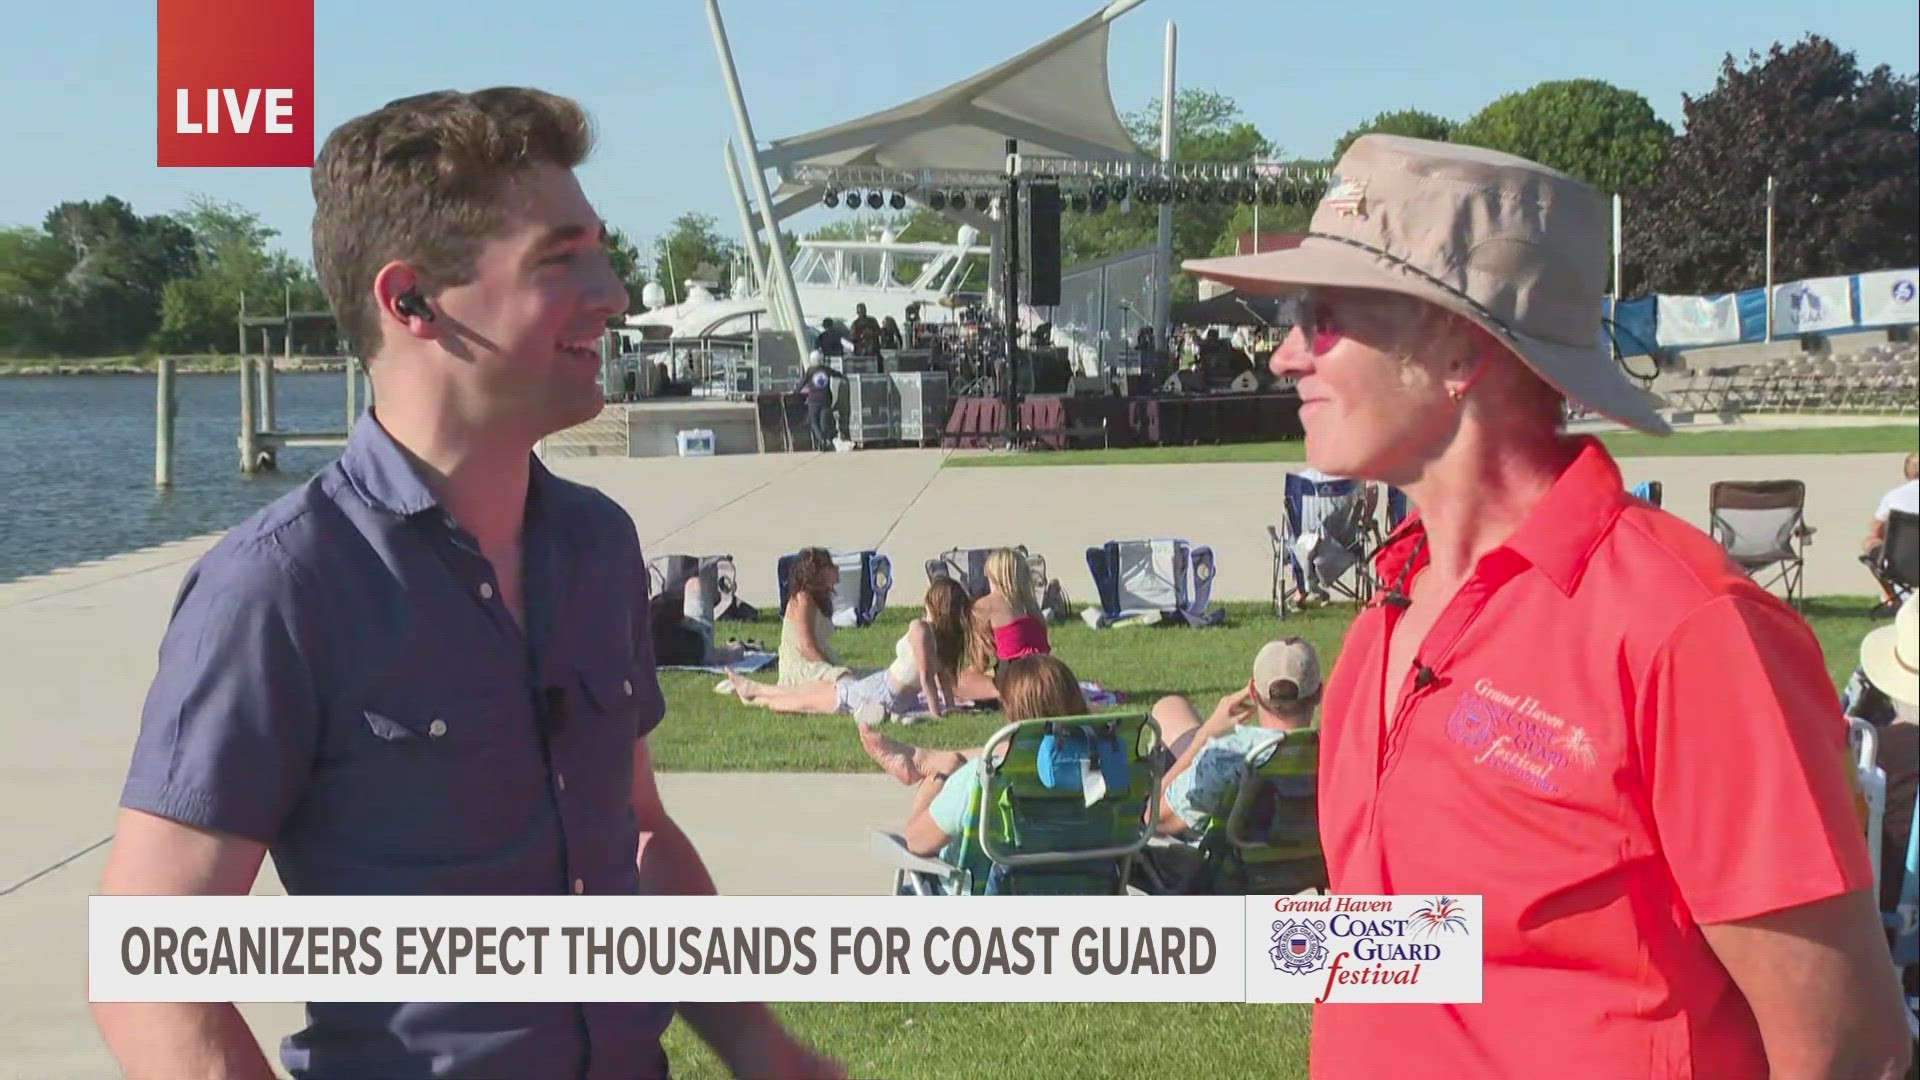 As Coast Guard Fest continues throughout the week, organizers expect hundreds of thousands of people to move through Grand Haven.